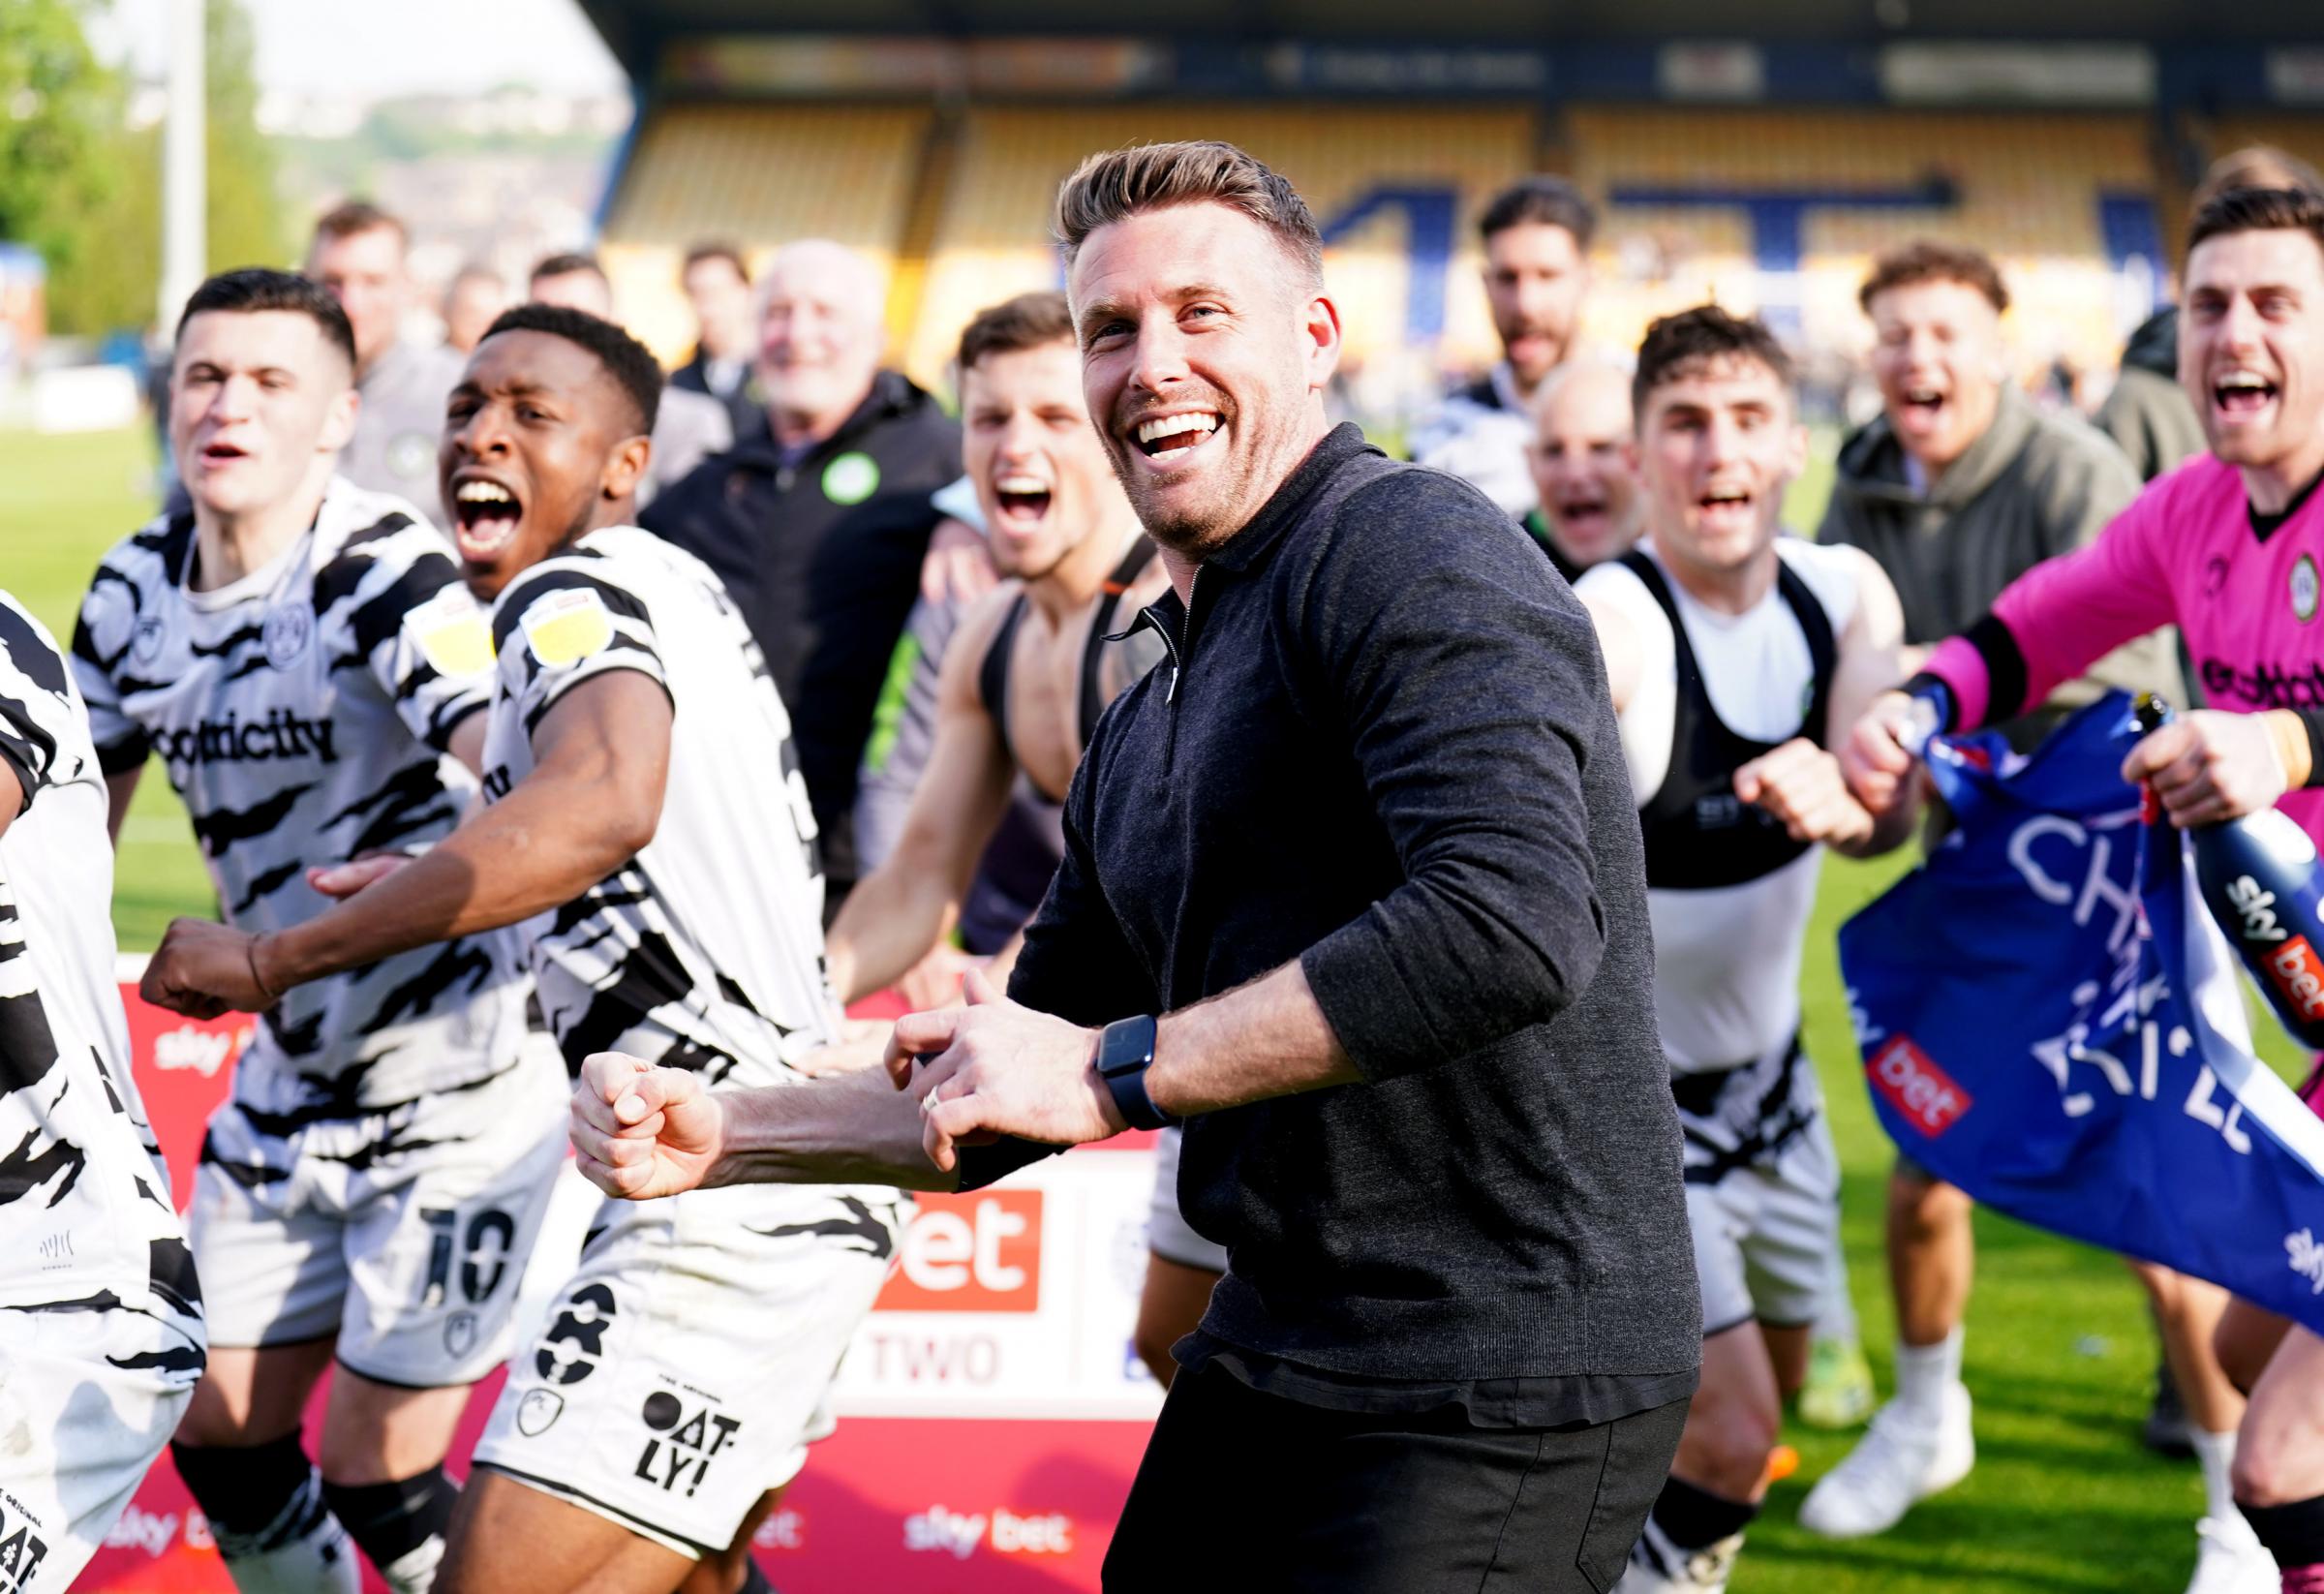 Forest Green Rovers manager Rob Edwards (centre) celebrating after his side won the league after the final whistle of the Sky Bet League Two match at the One Call Stadium, Mansfield. Picture date: Saturday May 7, 2022. PA Photo. See PA story SOCCER